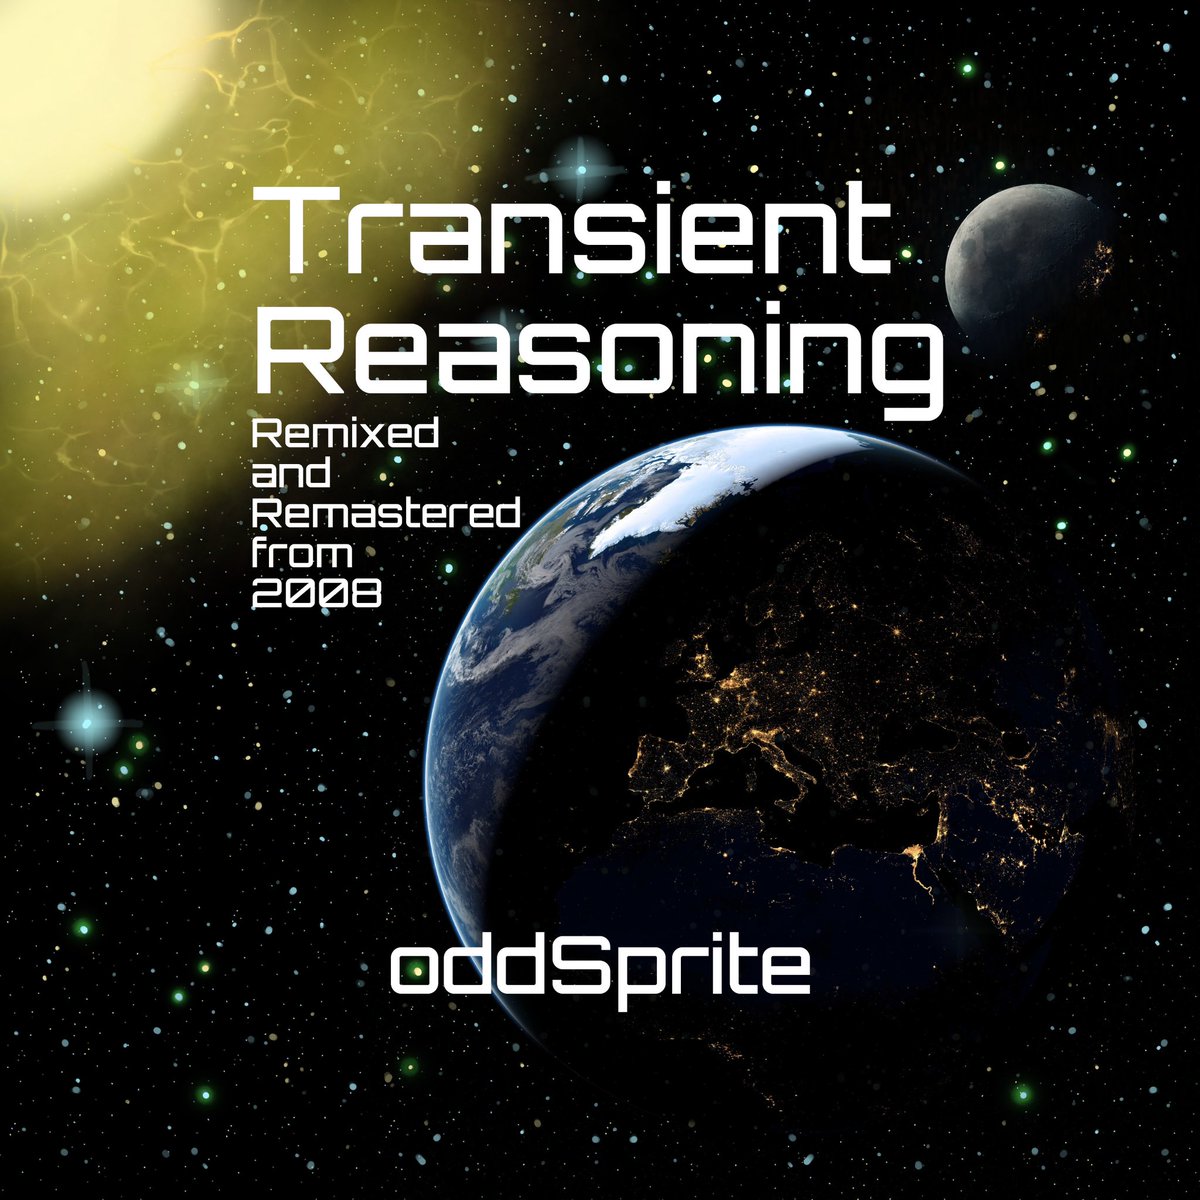 Embark on a human journey from the Big Bang to the Apocalypse with my debut album of epic #Electronica! Be transported through time and space with my one-of-a-kind musical odyssey ‘Transient Reasoning’
#indie #indiemusic #synth #spacesynth #debutalbum